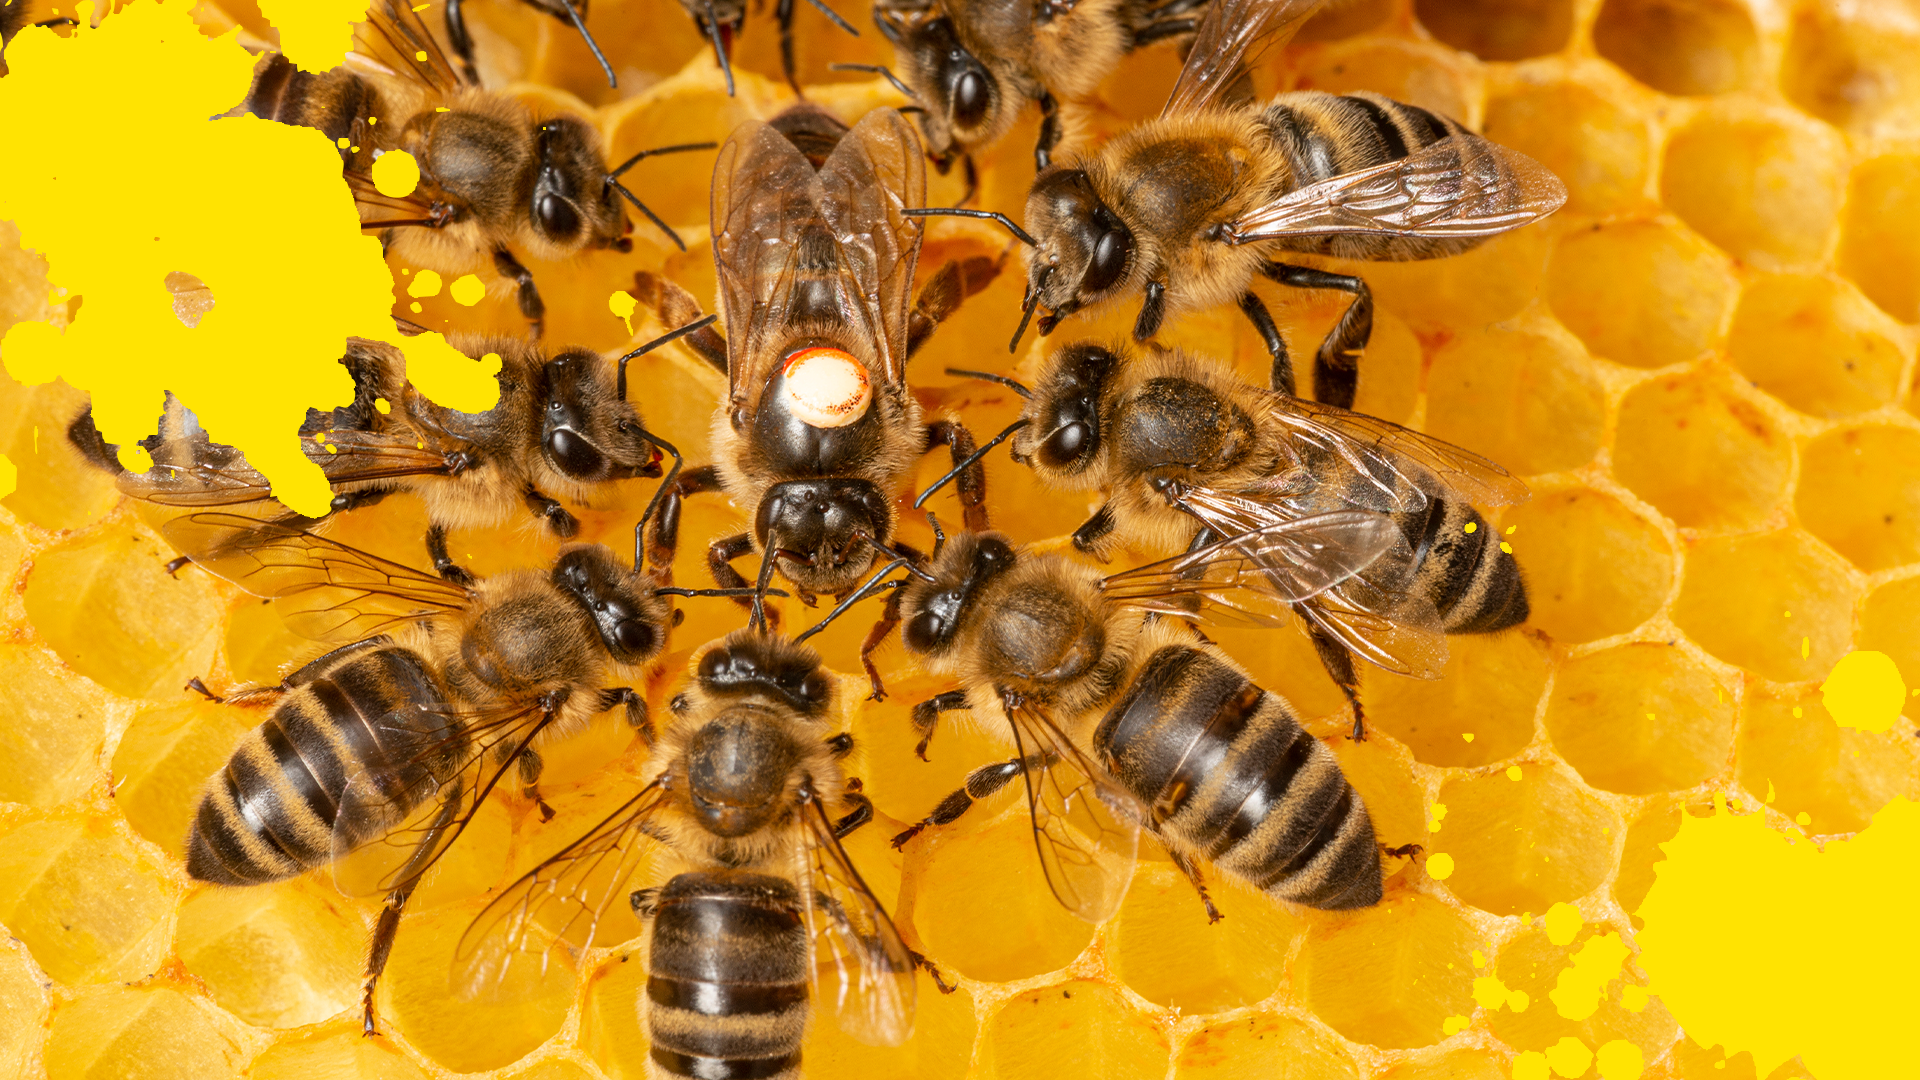 Some bees together on a honeycomb and yellow splats